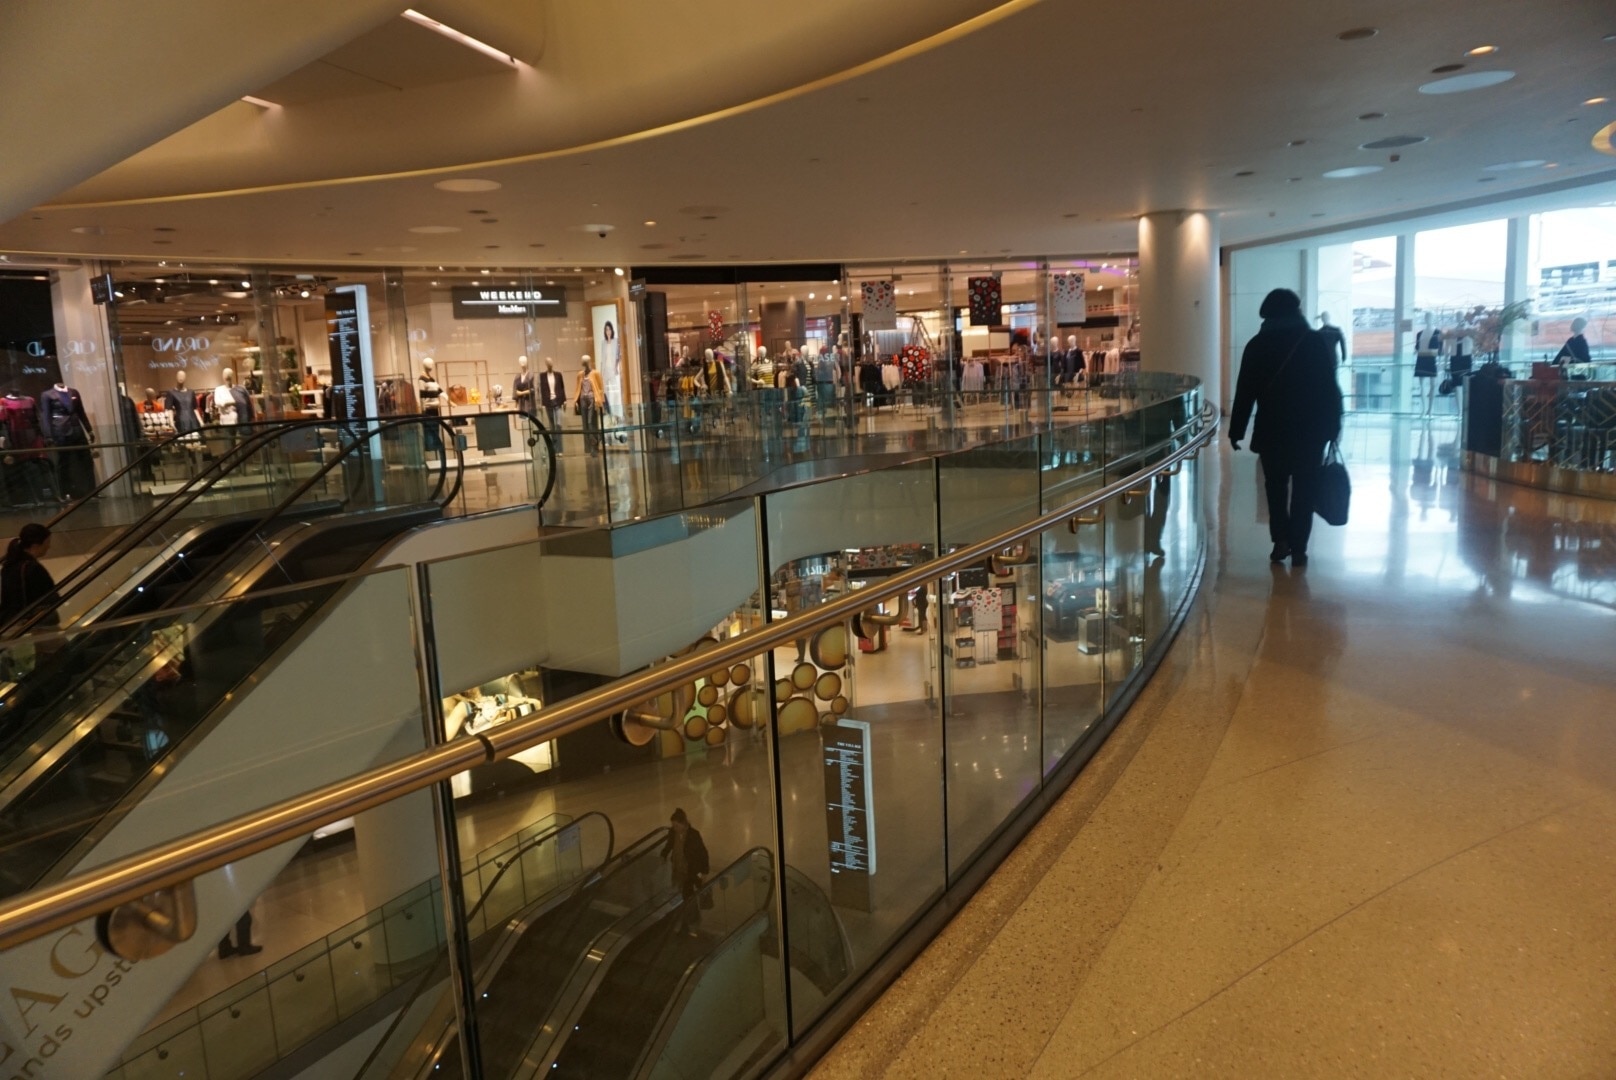 Westfield London - Shopping Centre 